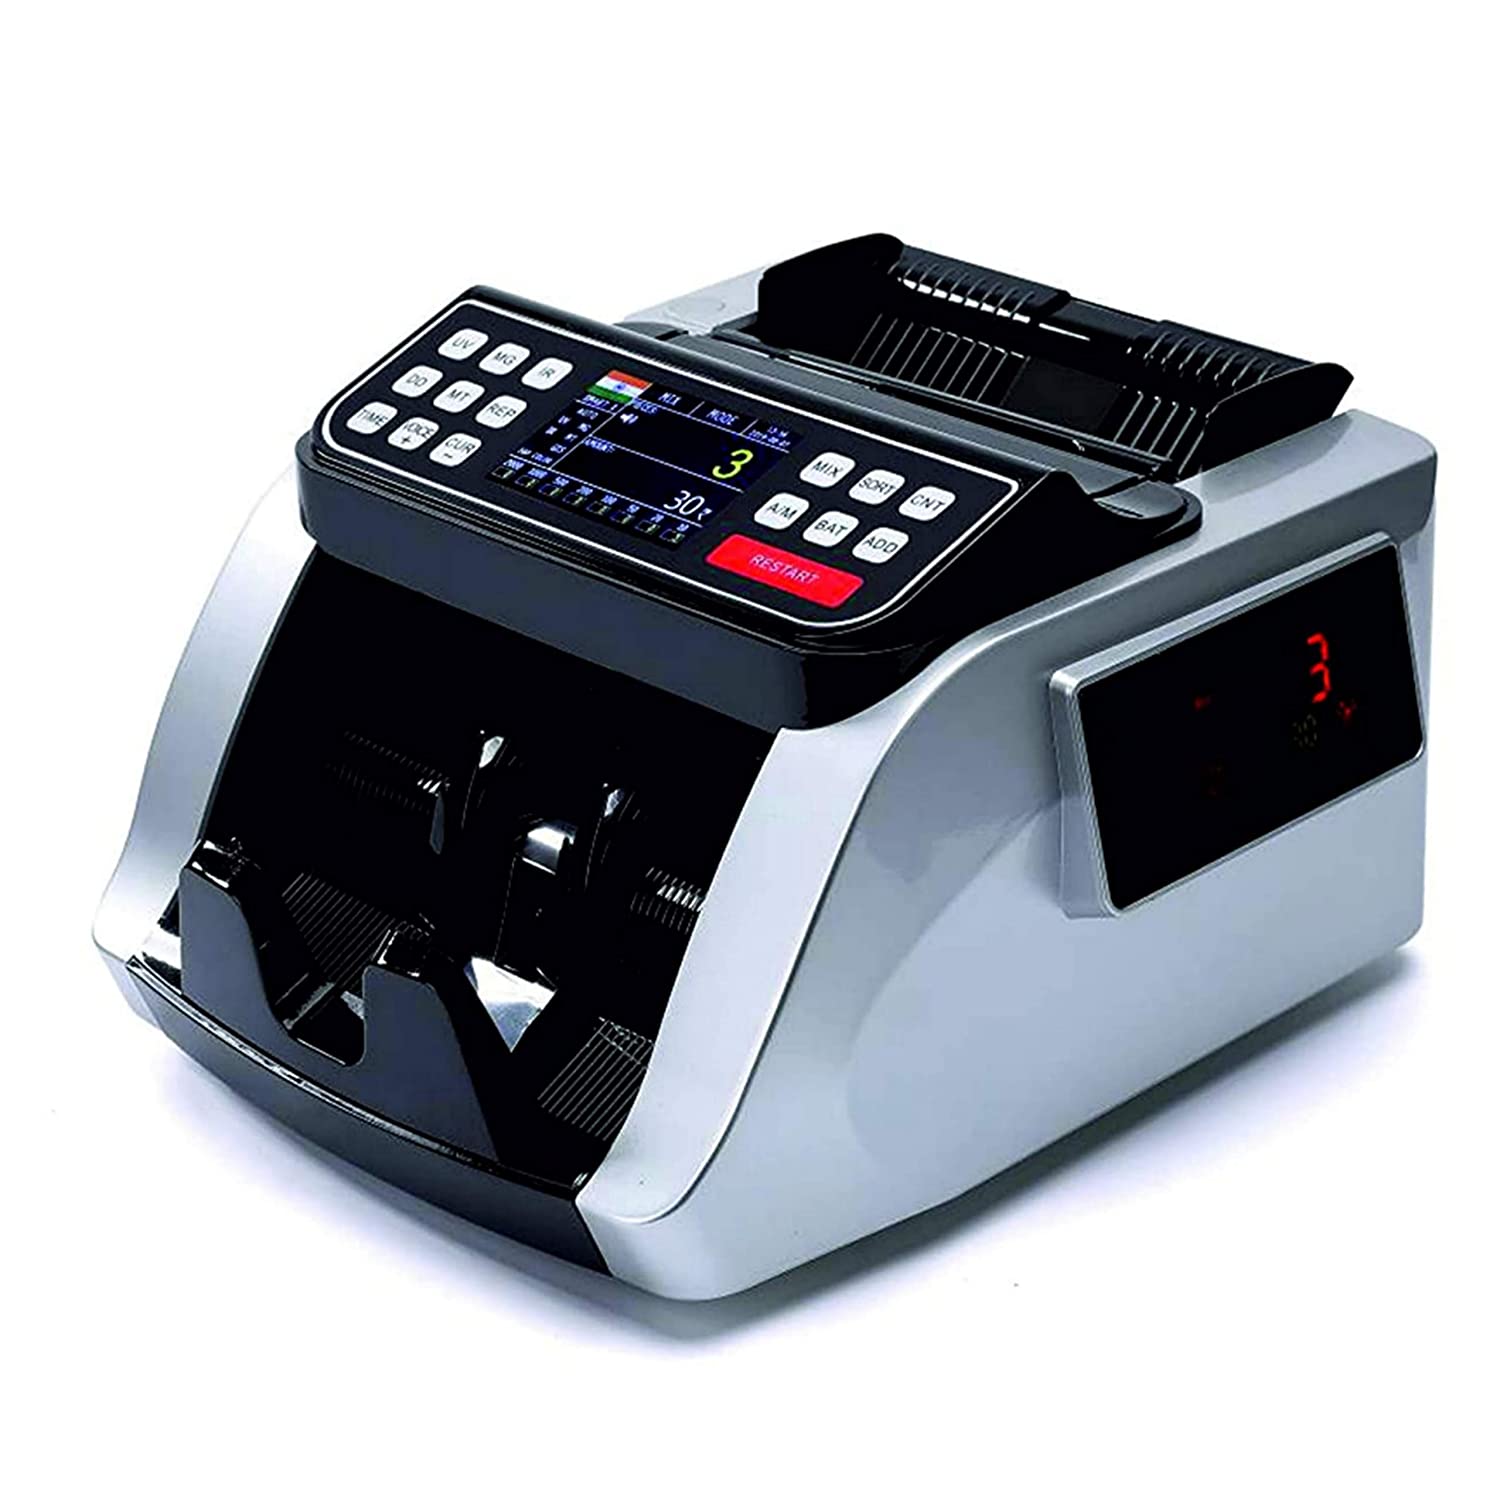 JD9 Mix Note Value Counting Machine Fully Automatic with Japanese Technology Fake Note Detection, Compatible with New Currency.